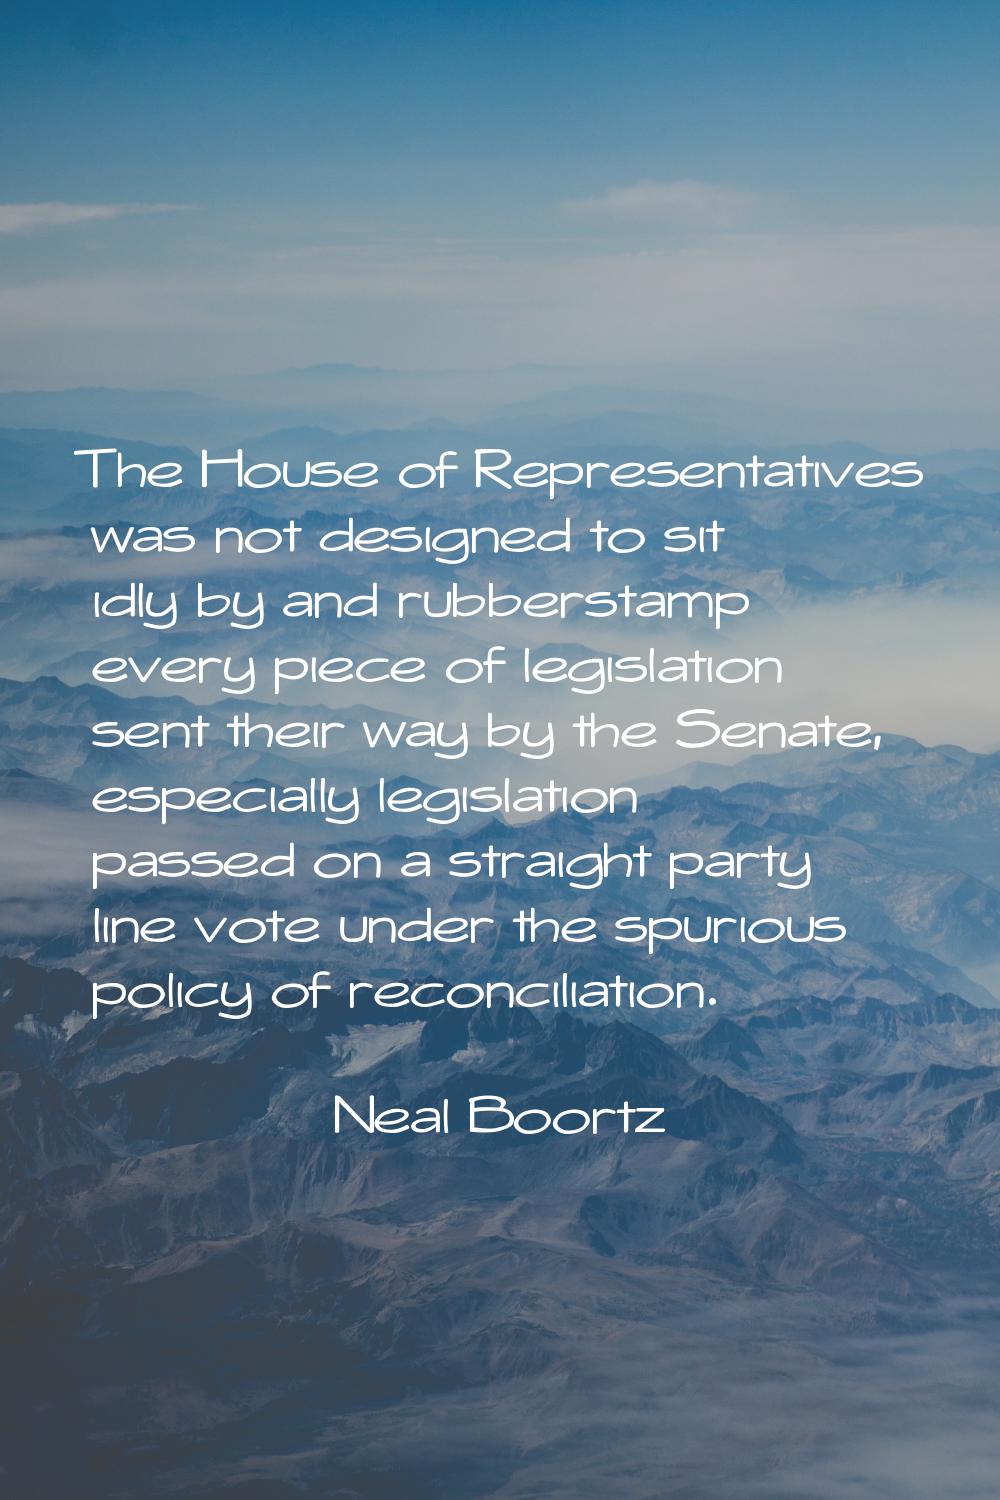 The House of Representatives was not designed to sit idly by and rubberstamp every piece of legisla